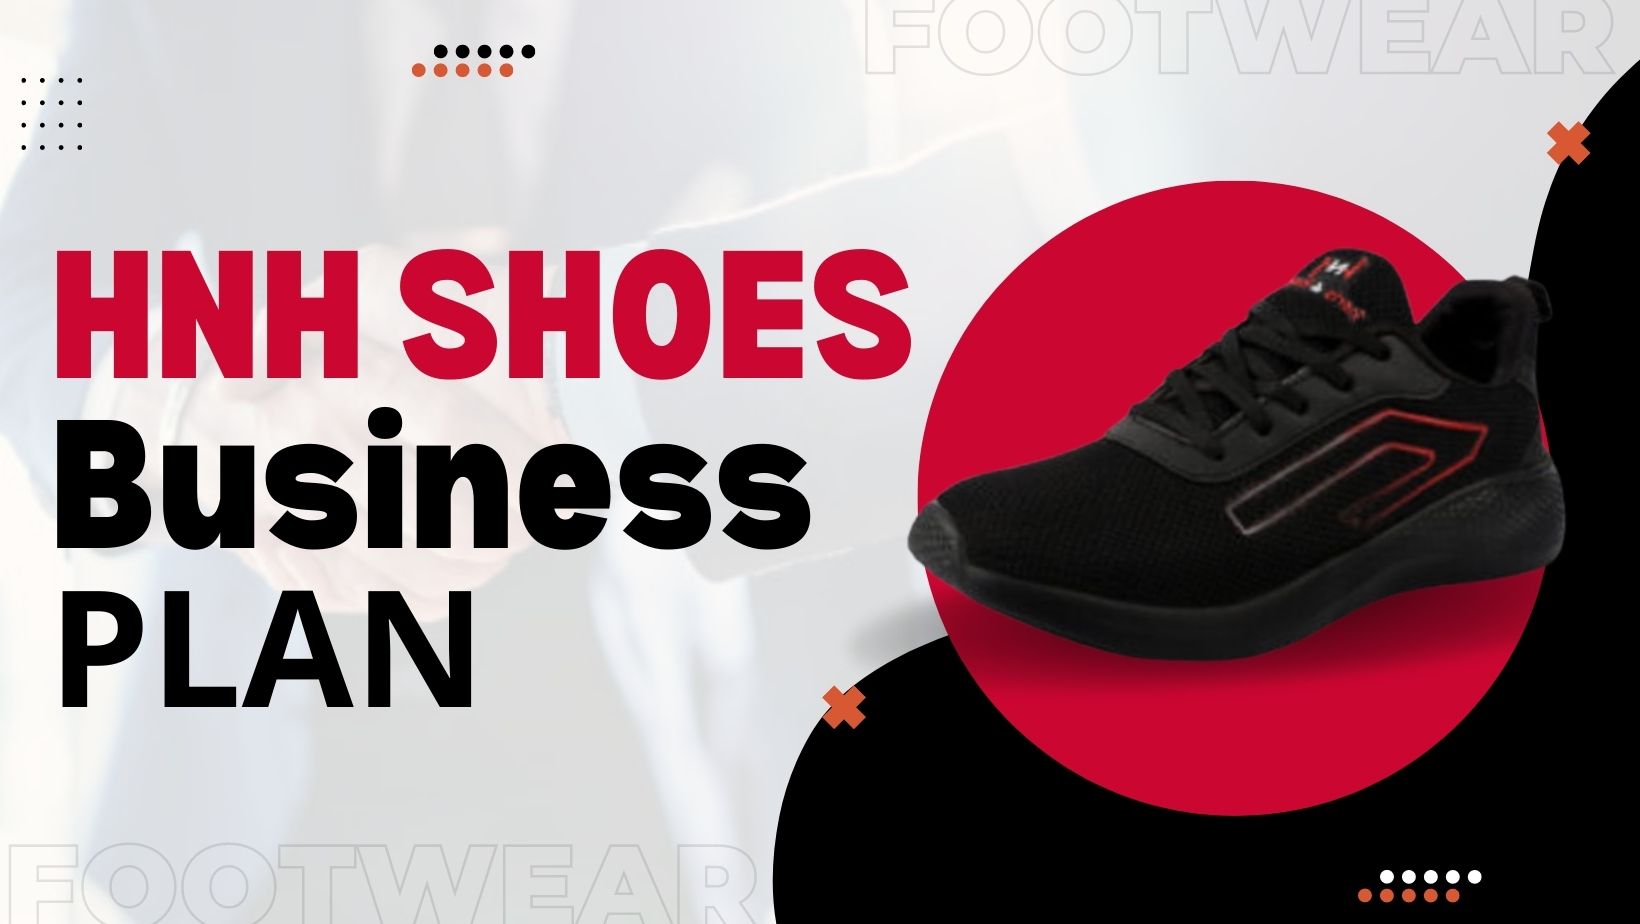 Business Batao is providing HNH Shoes Business plan whis is best footwear business plan because this brand make neem shoes this is eco friendly shoes which is sweat free shoes